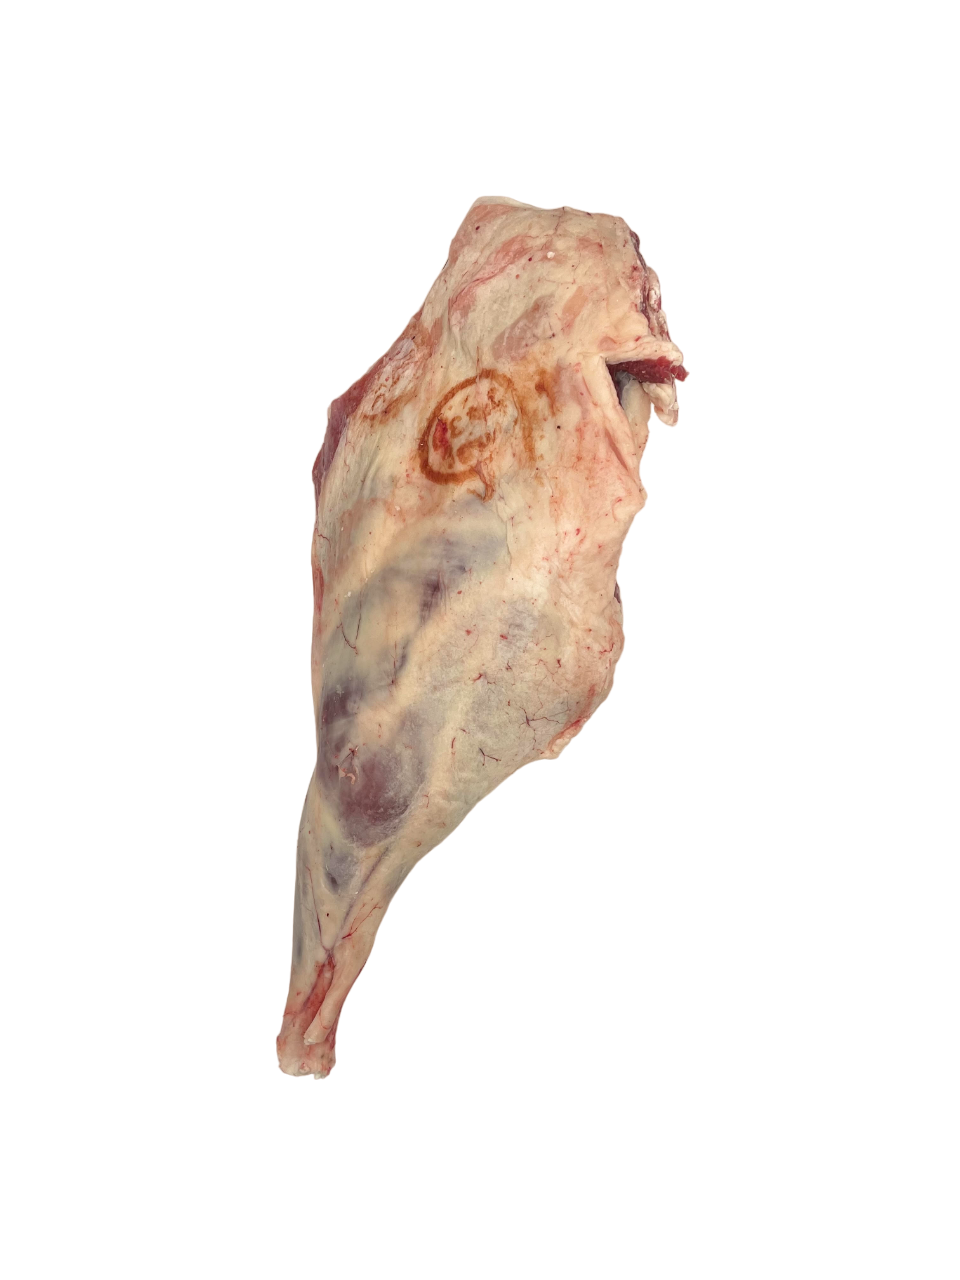 Halal Mutton Leg With Fat